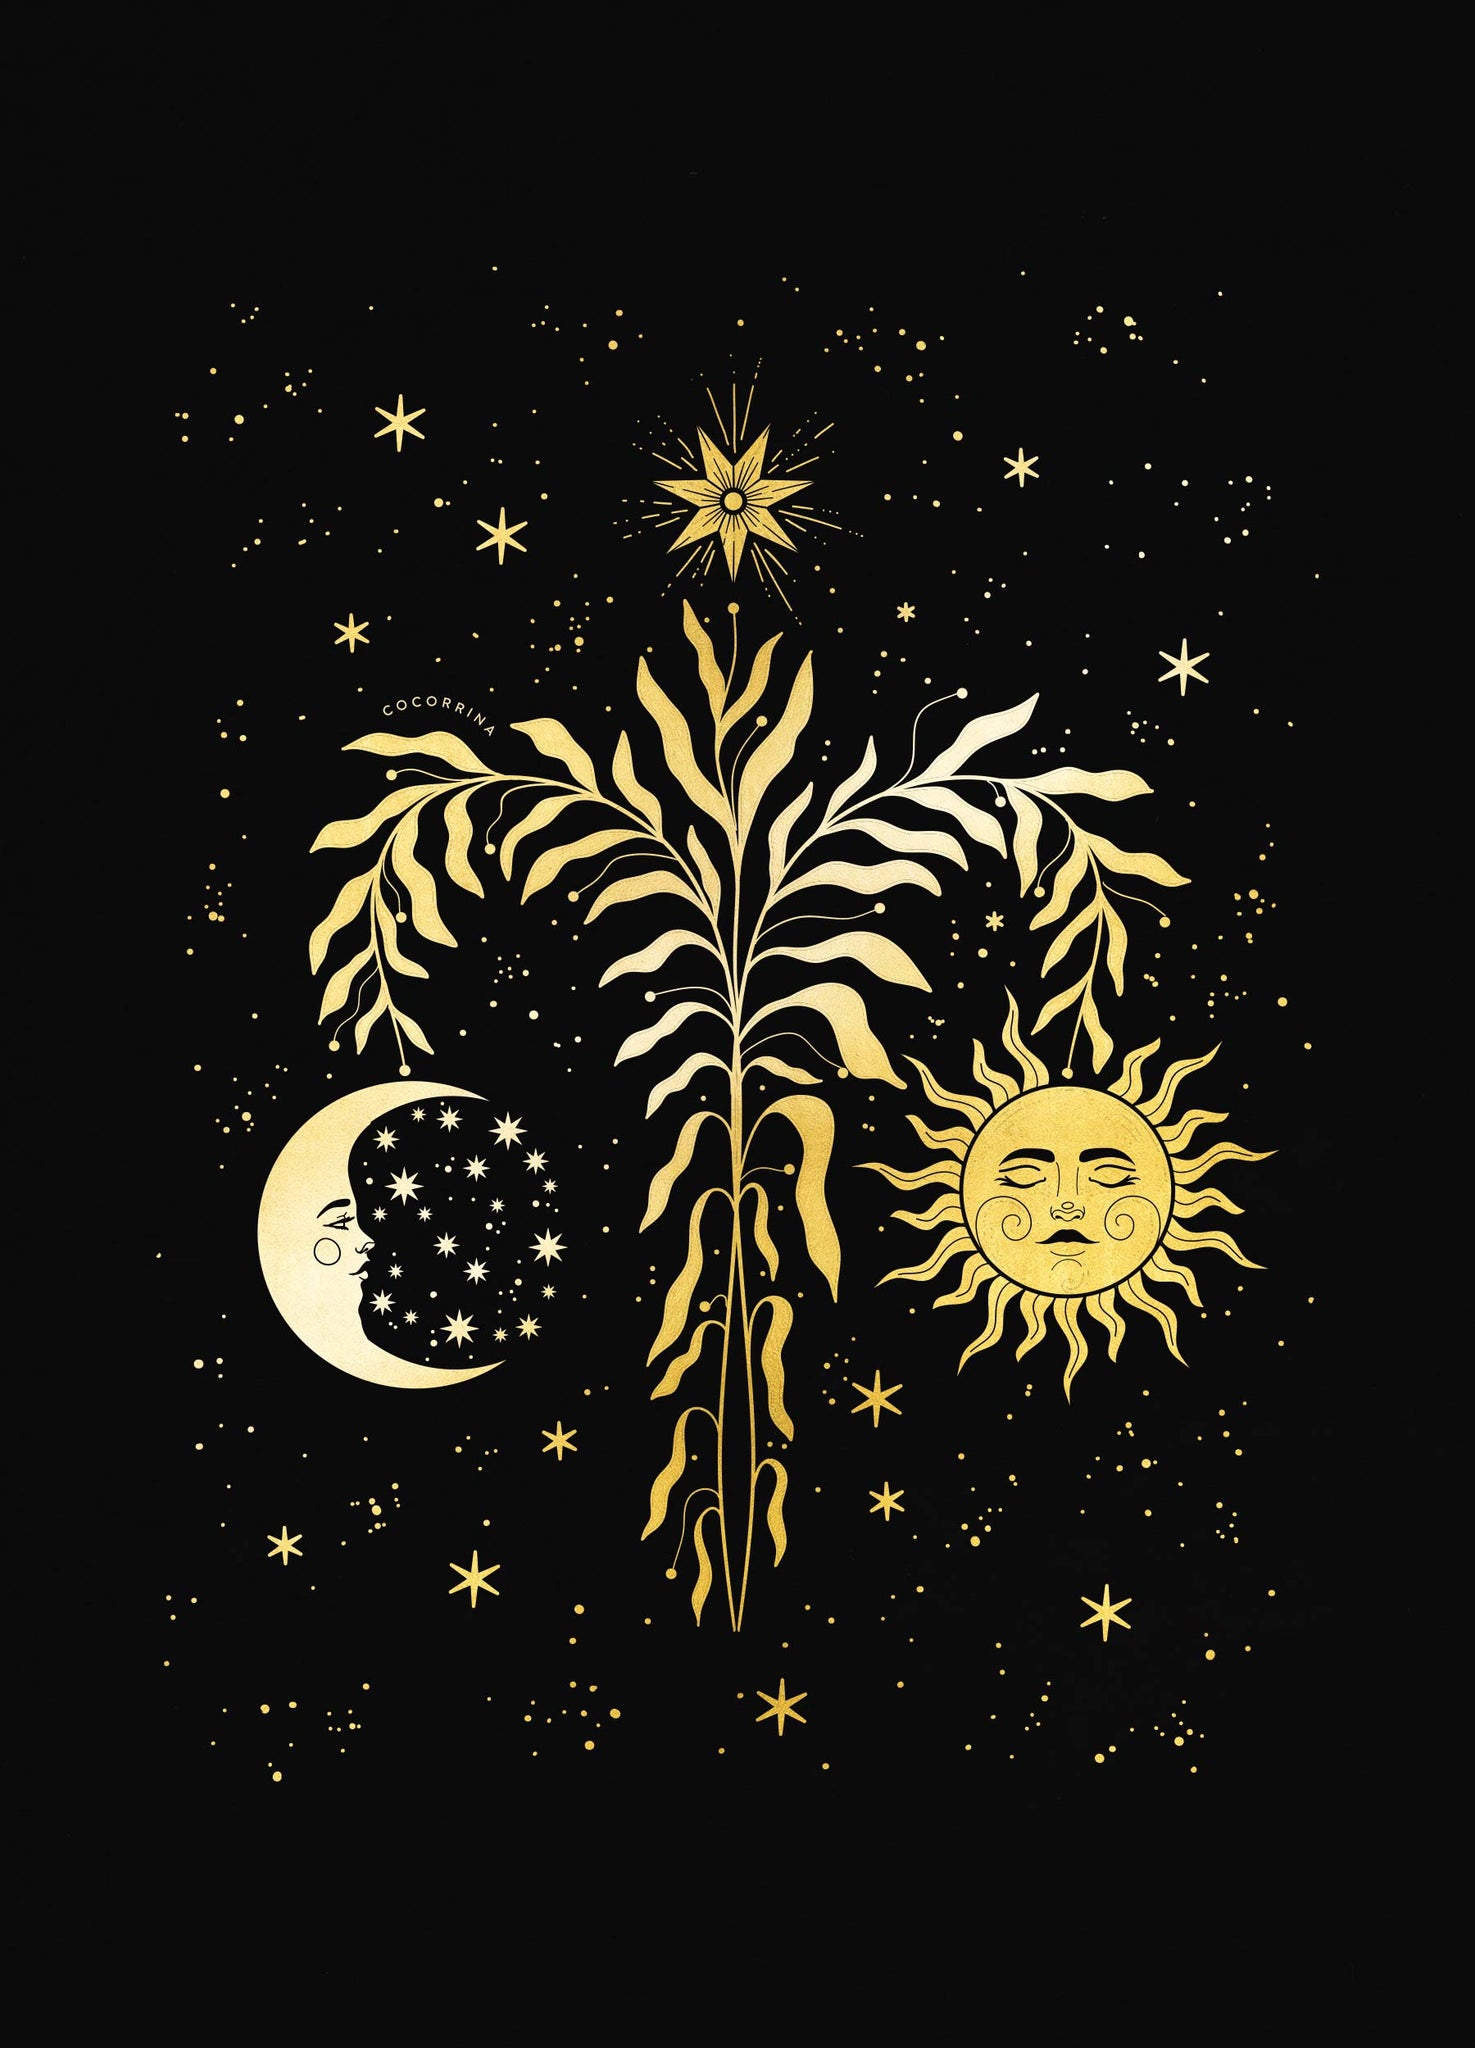 The Yule tree with a sun, moon and star gold foil art print on black paper by Cocorrina & Co